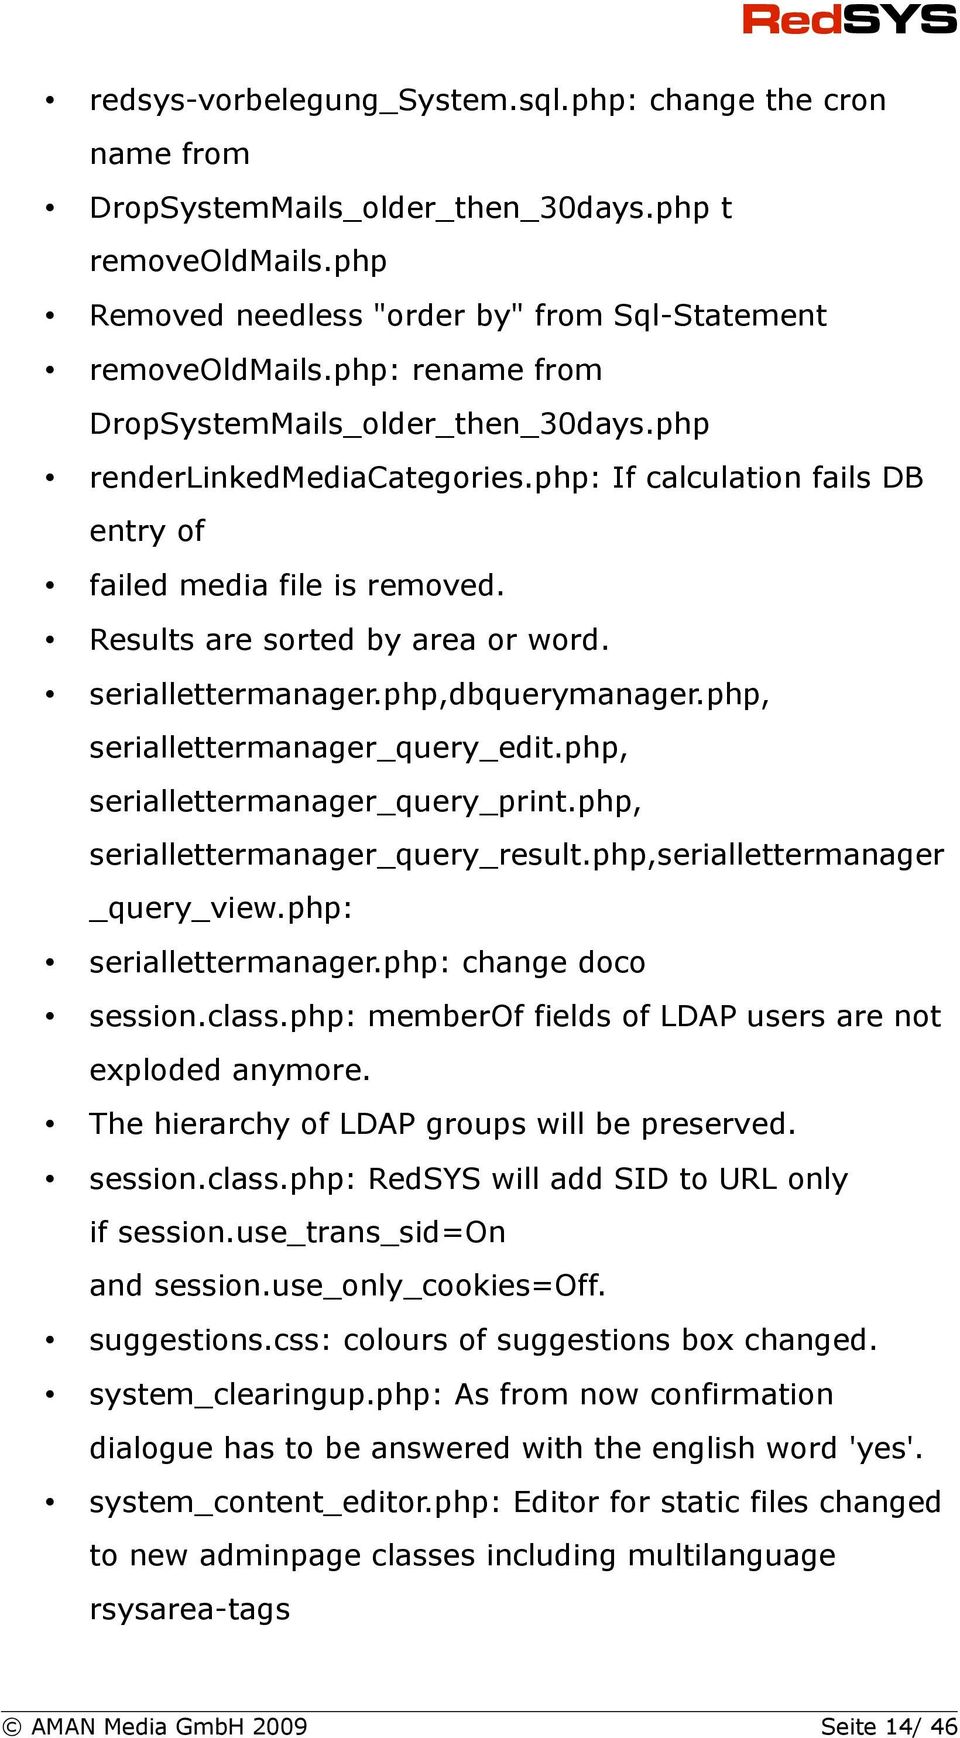 seriallettermanager.php,dbquerymanager.php, seriallettermanager_query_edit.php, seriallettermanager_query_print.php, seriallettermanager_query_result.php,seriallettermanager _query_view.